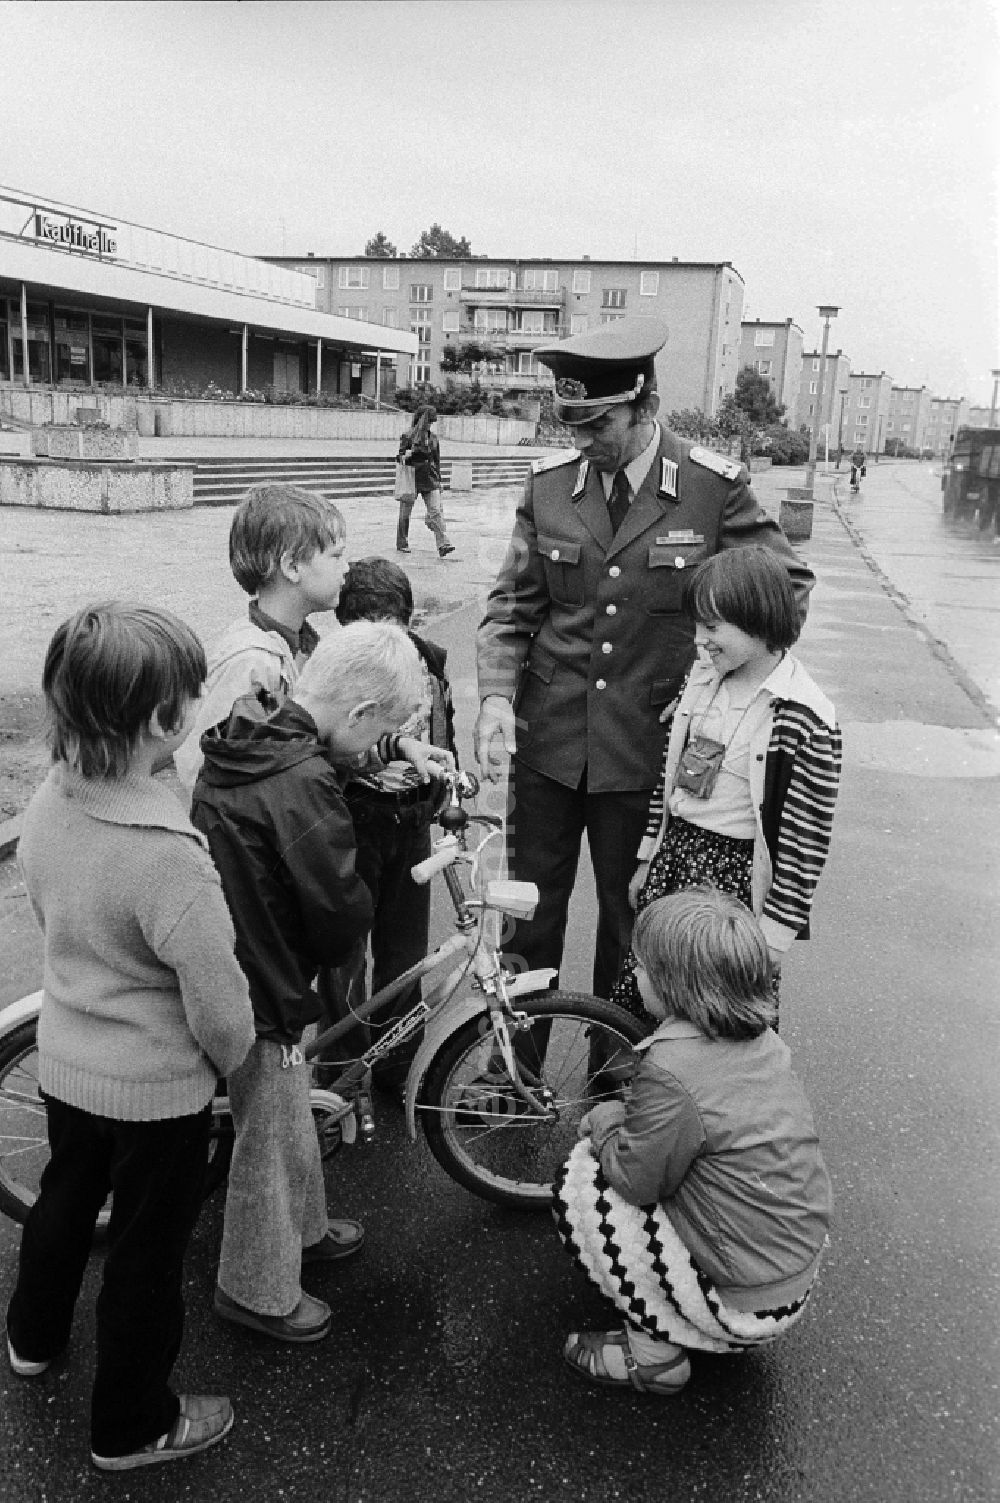 GDR picture archive: Berlin - A member of the People's Police / of segment authorised representative (ABV) with the road safety education in Berlin, the former capital of the GDR, German democratic republic. Here he controls the traffic suitability of a bicycle of the children